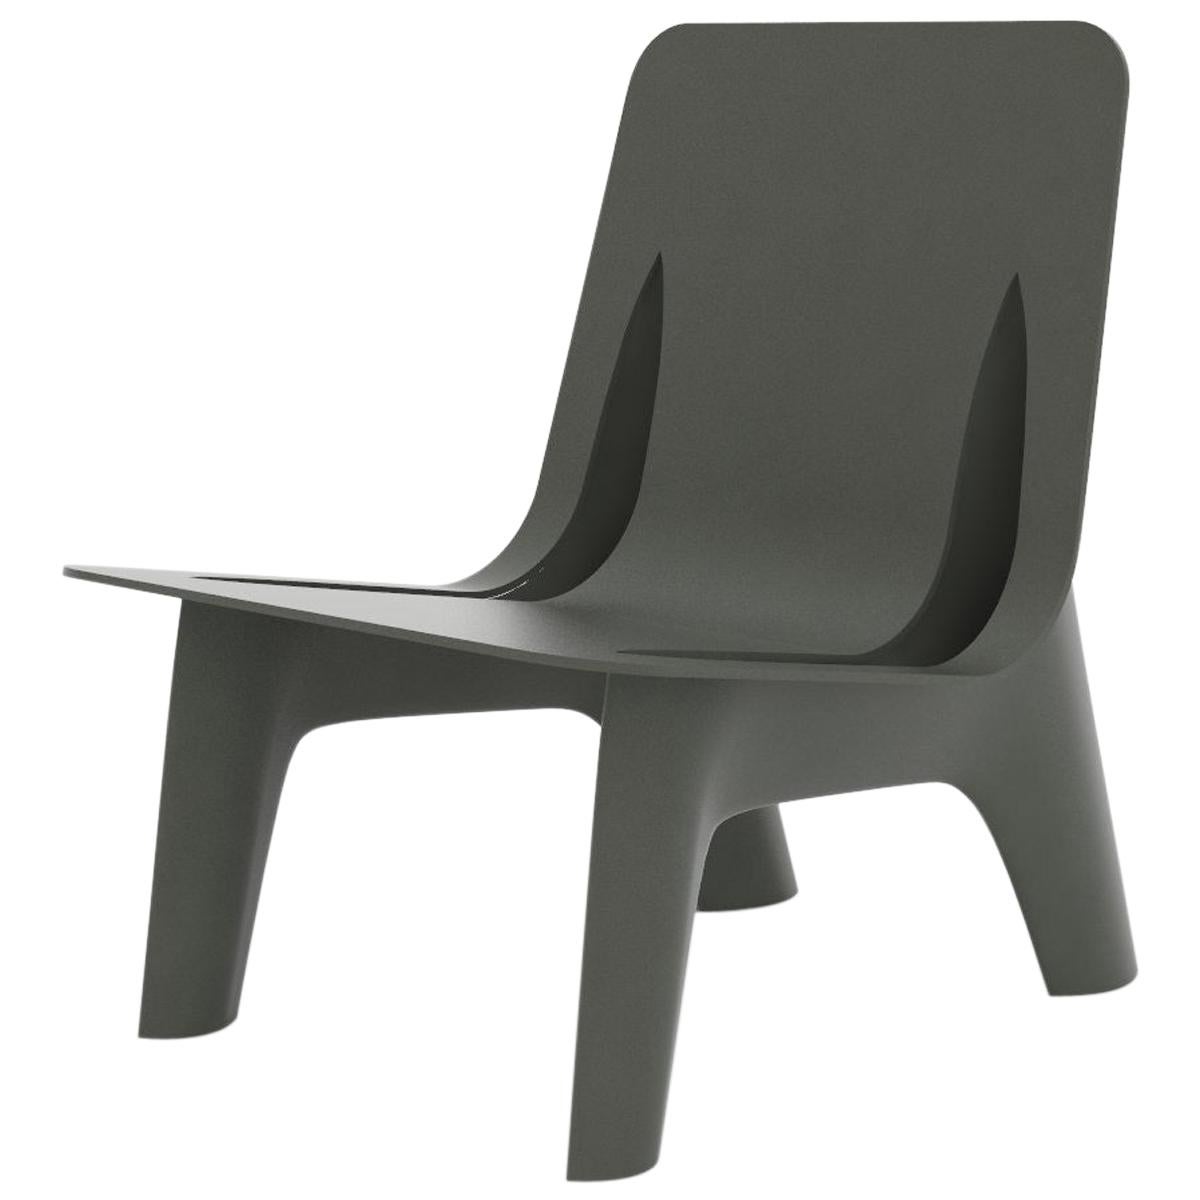 J-Chair Lounge Polished Umbra Grey Color Carbon Steel Seating by Zieta